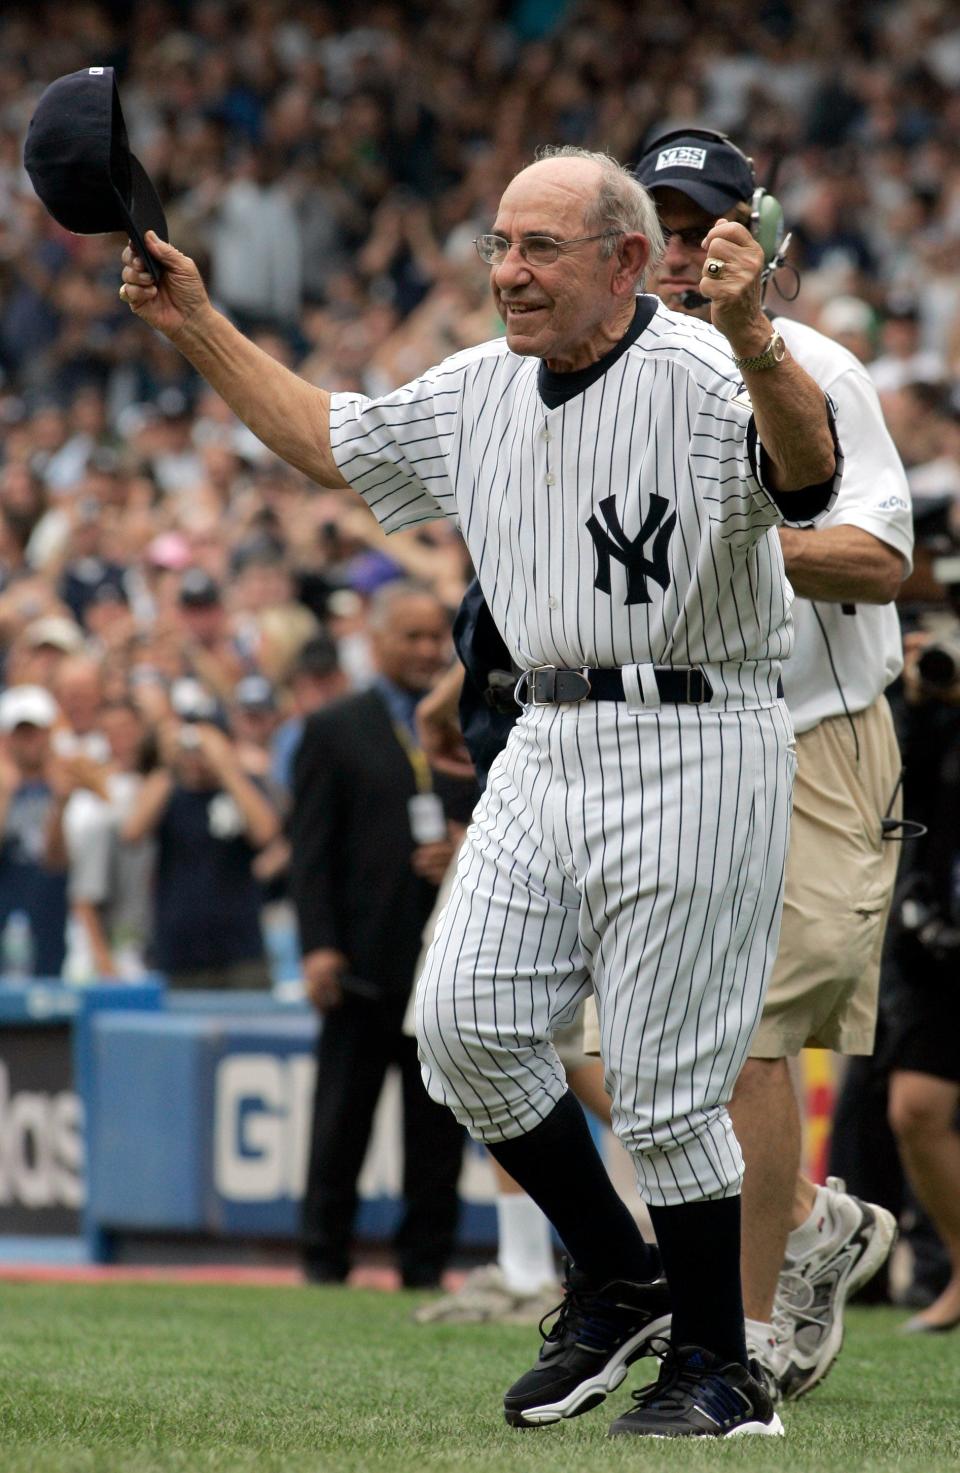 New York Yankees legend Yogi Berra tips his cap to fans during introduction ceremonies at Old Timers' Day at Yankee Stadium, Saturday, Aug. 2, 2008. (AP Photo/Ed Betz)